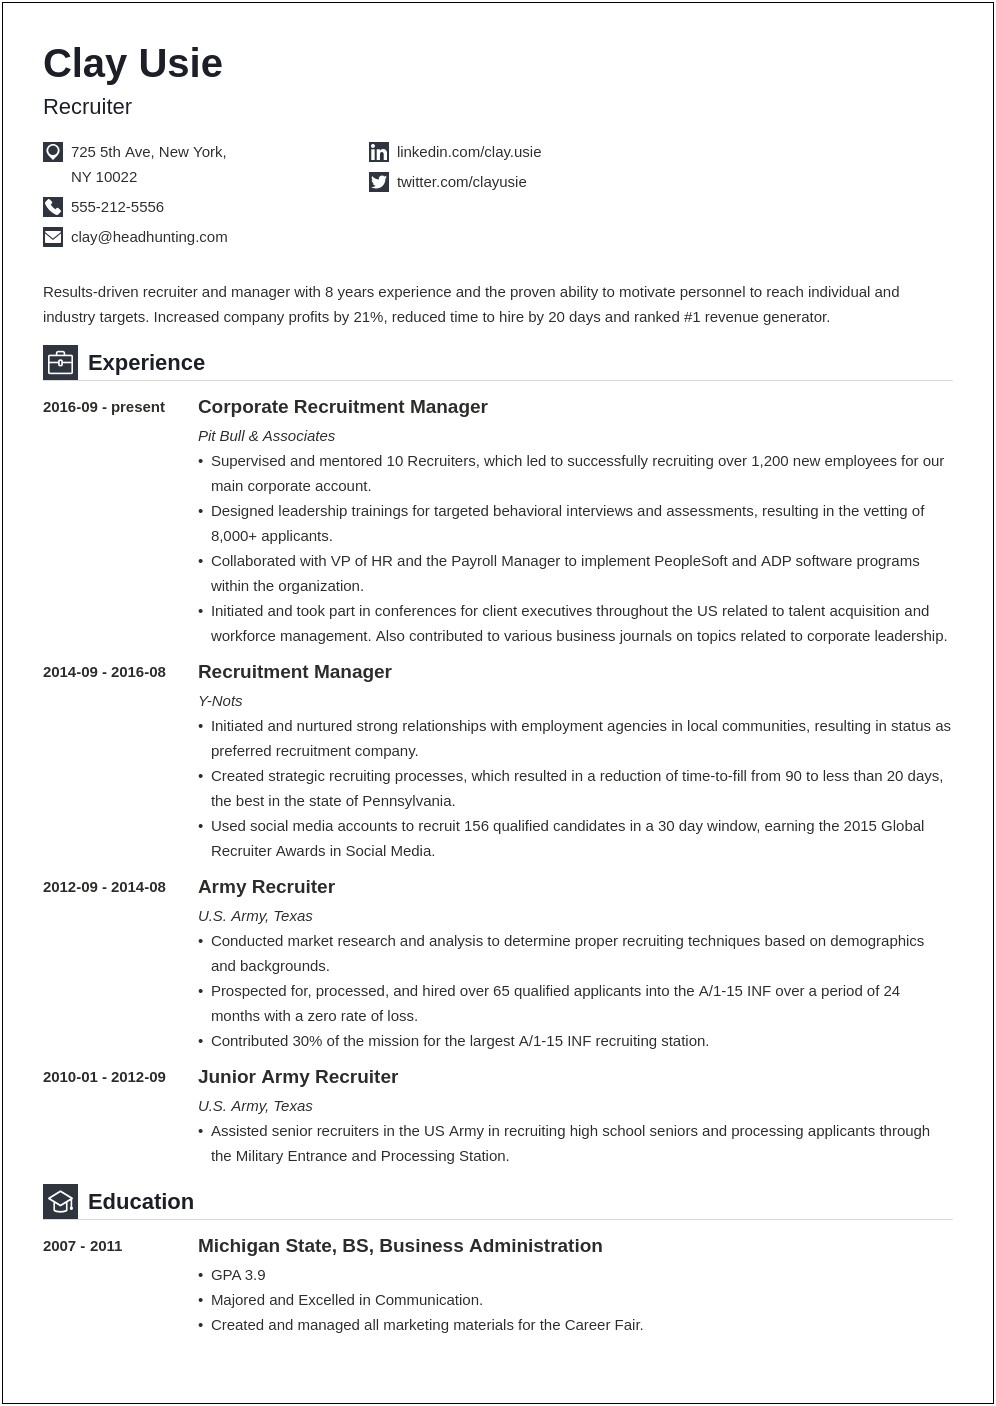 Resume Objective Examples For Recruiters